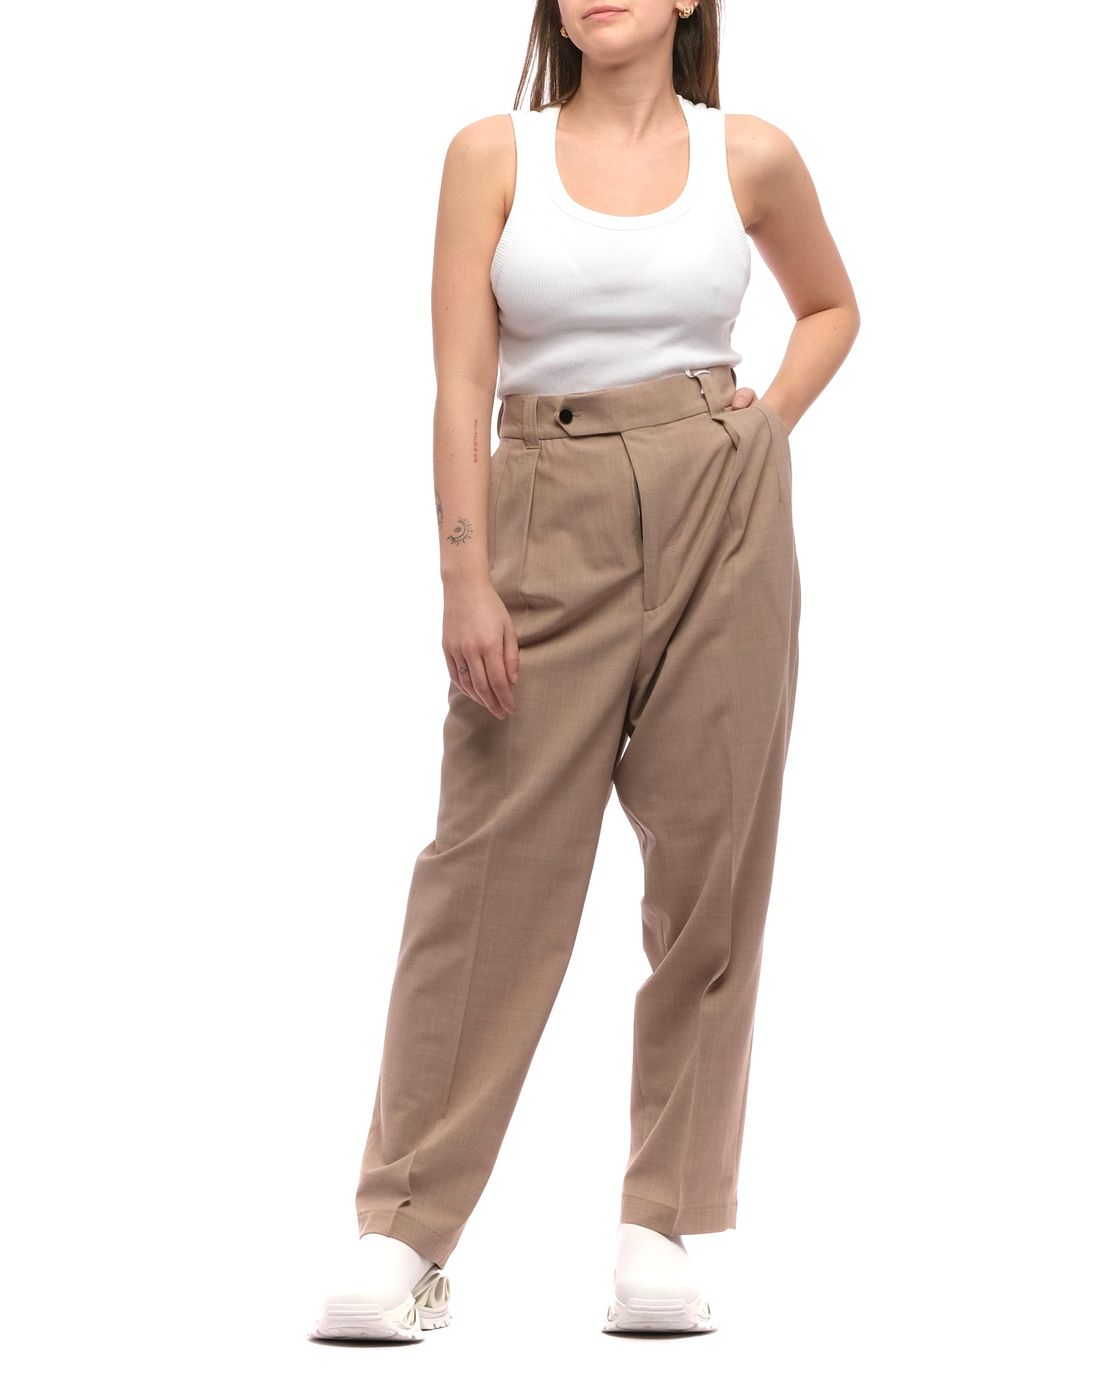 Trousers for woman PA910168 PW348 04 CELLAR DOOR